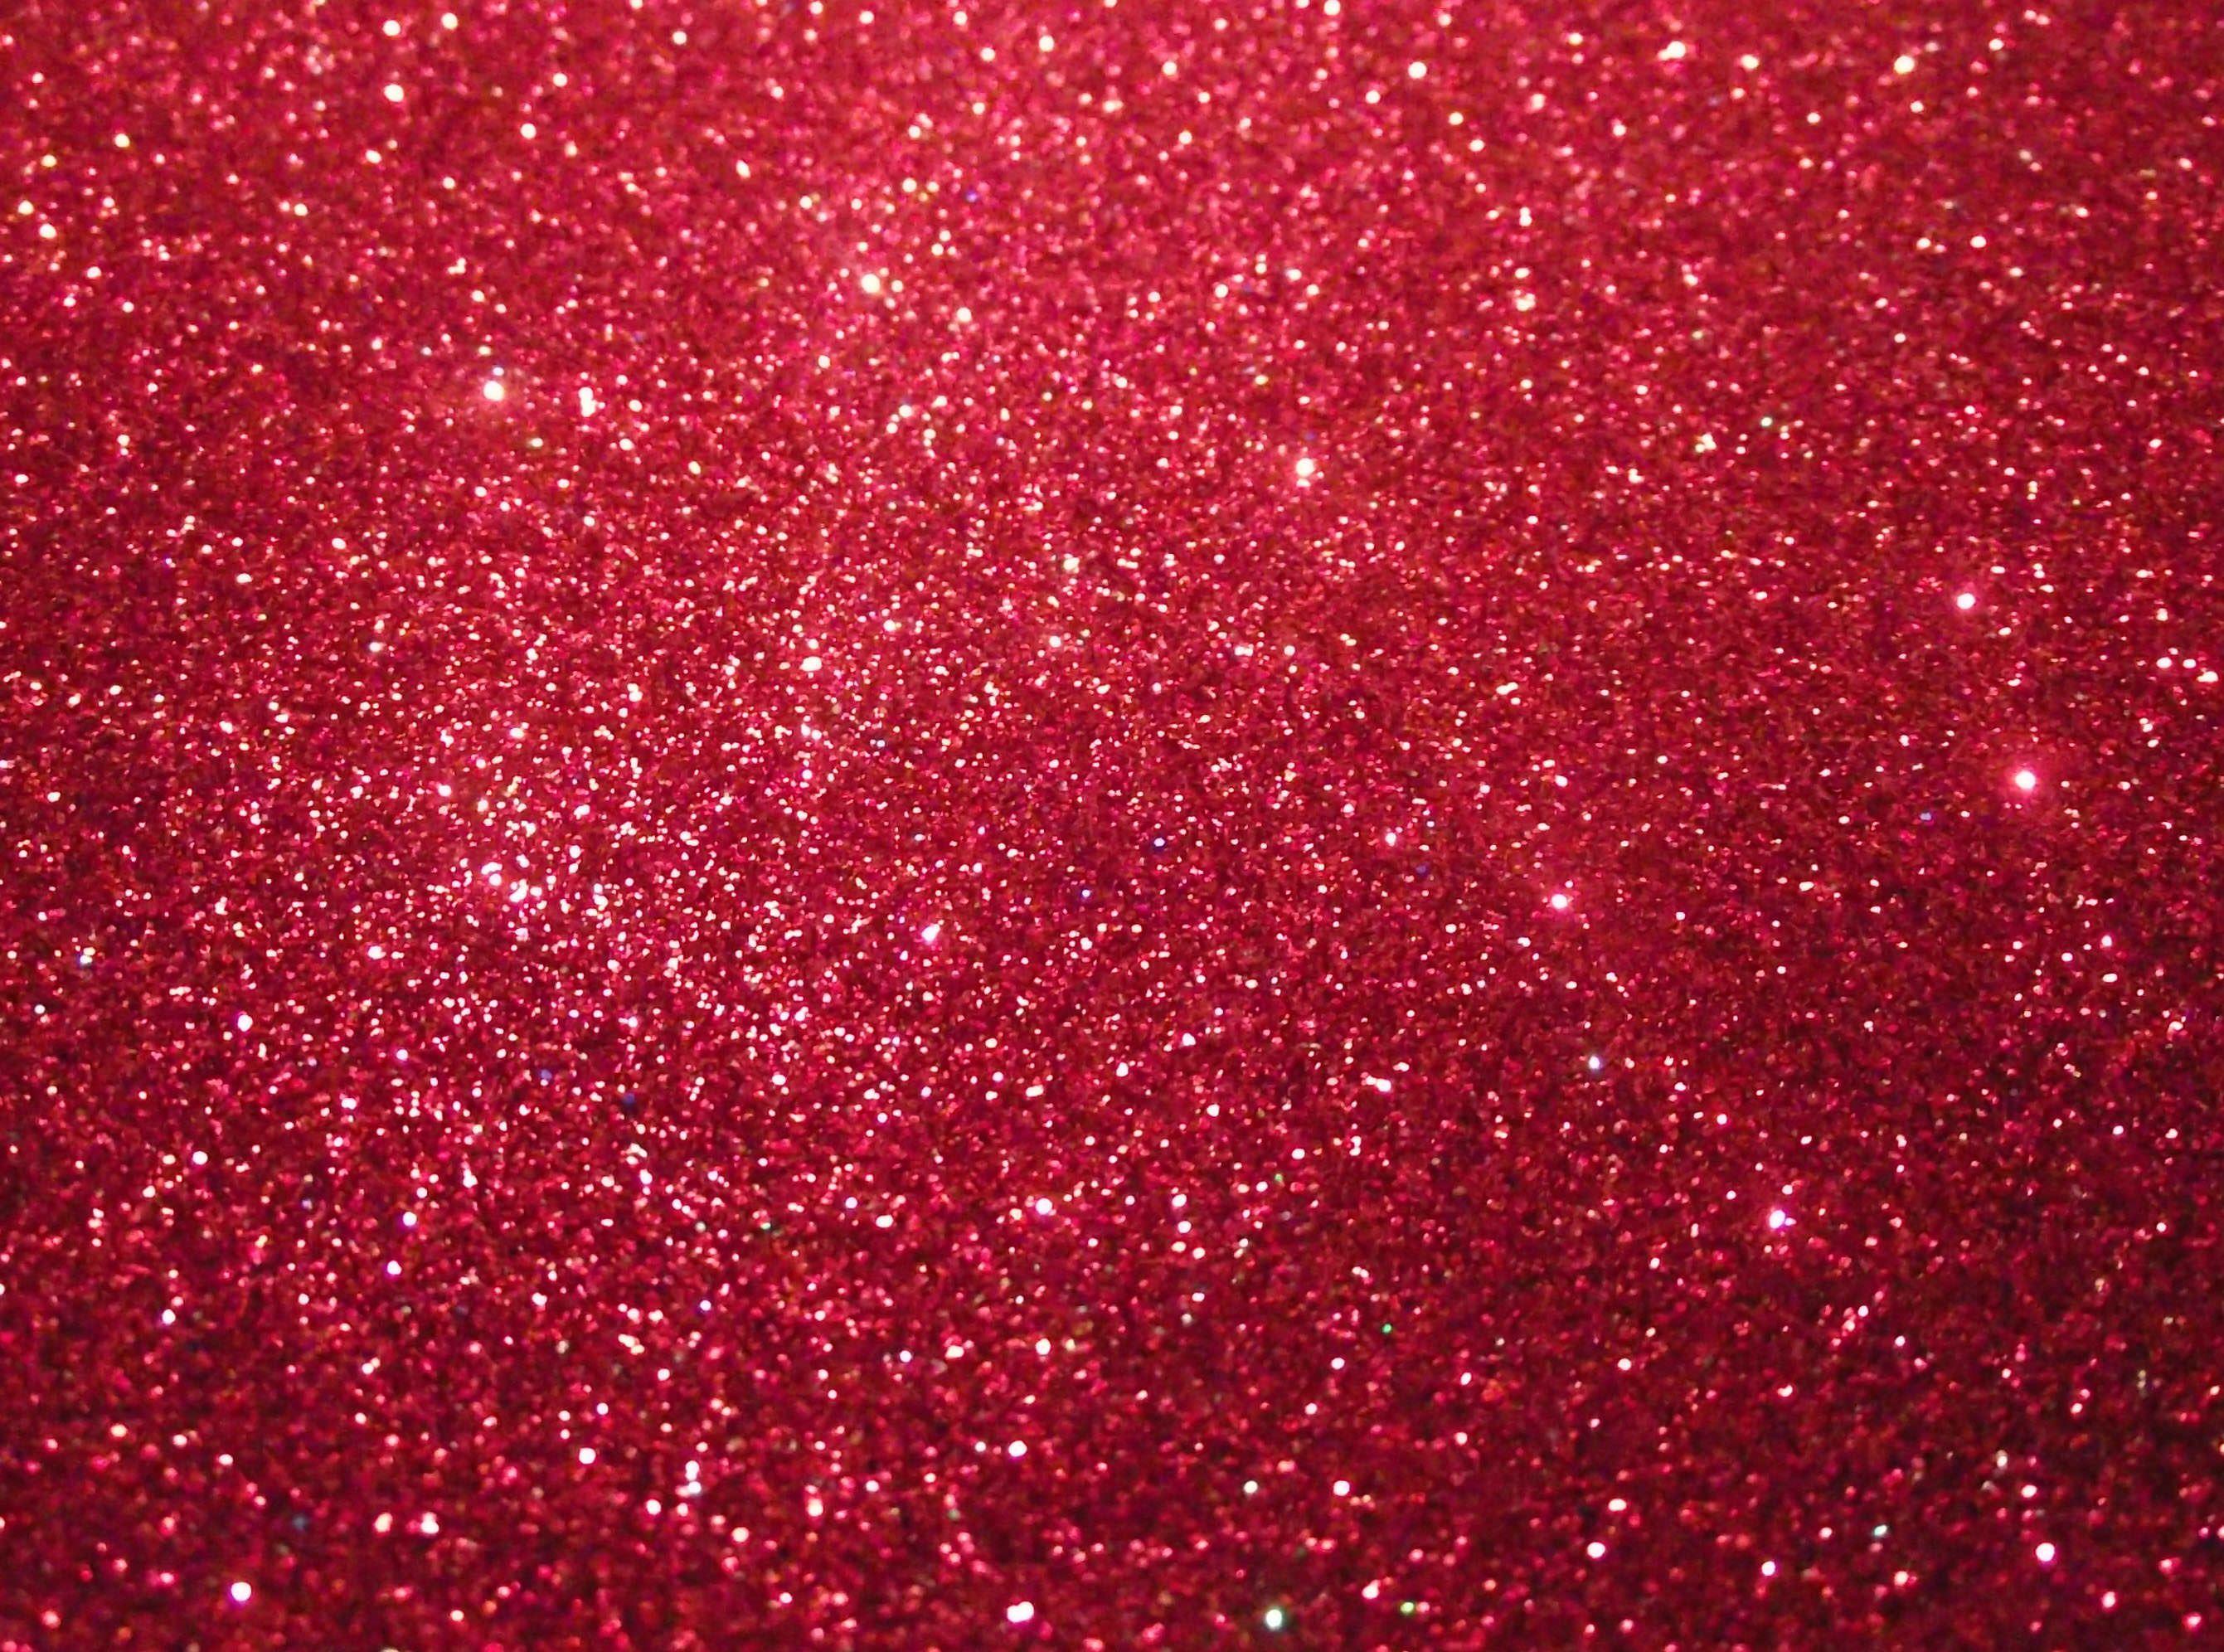 Glitter Aesthetic Tumblr Wallpapers - Top Free Glitter Aesthetic Tumblr